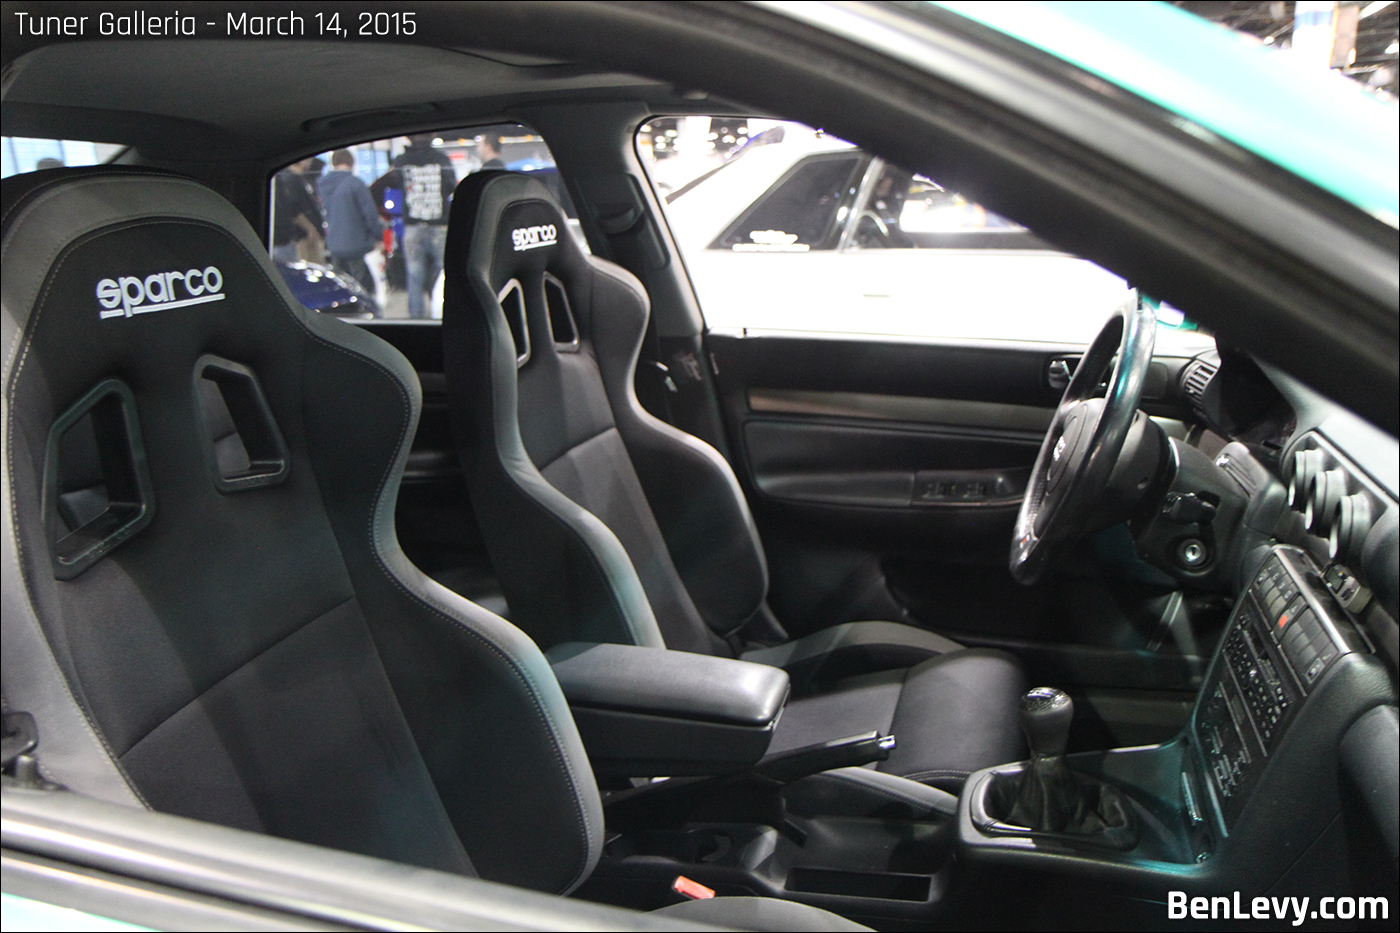 Sparco seats in Audi A4